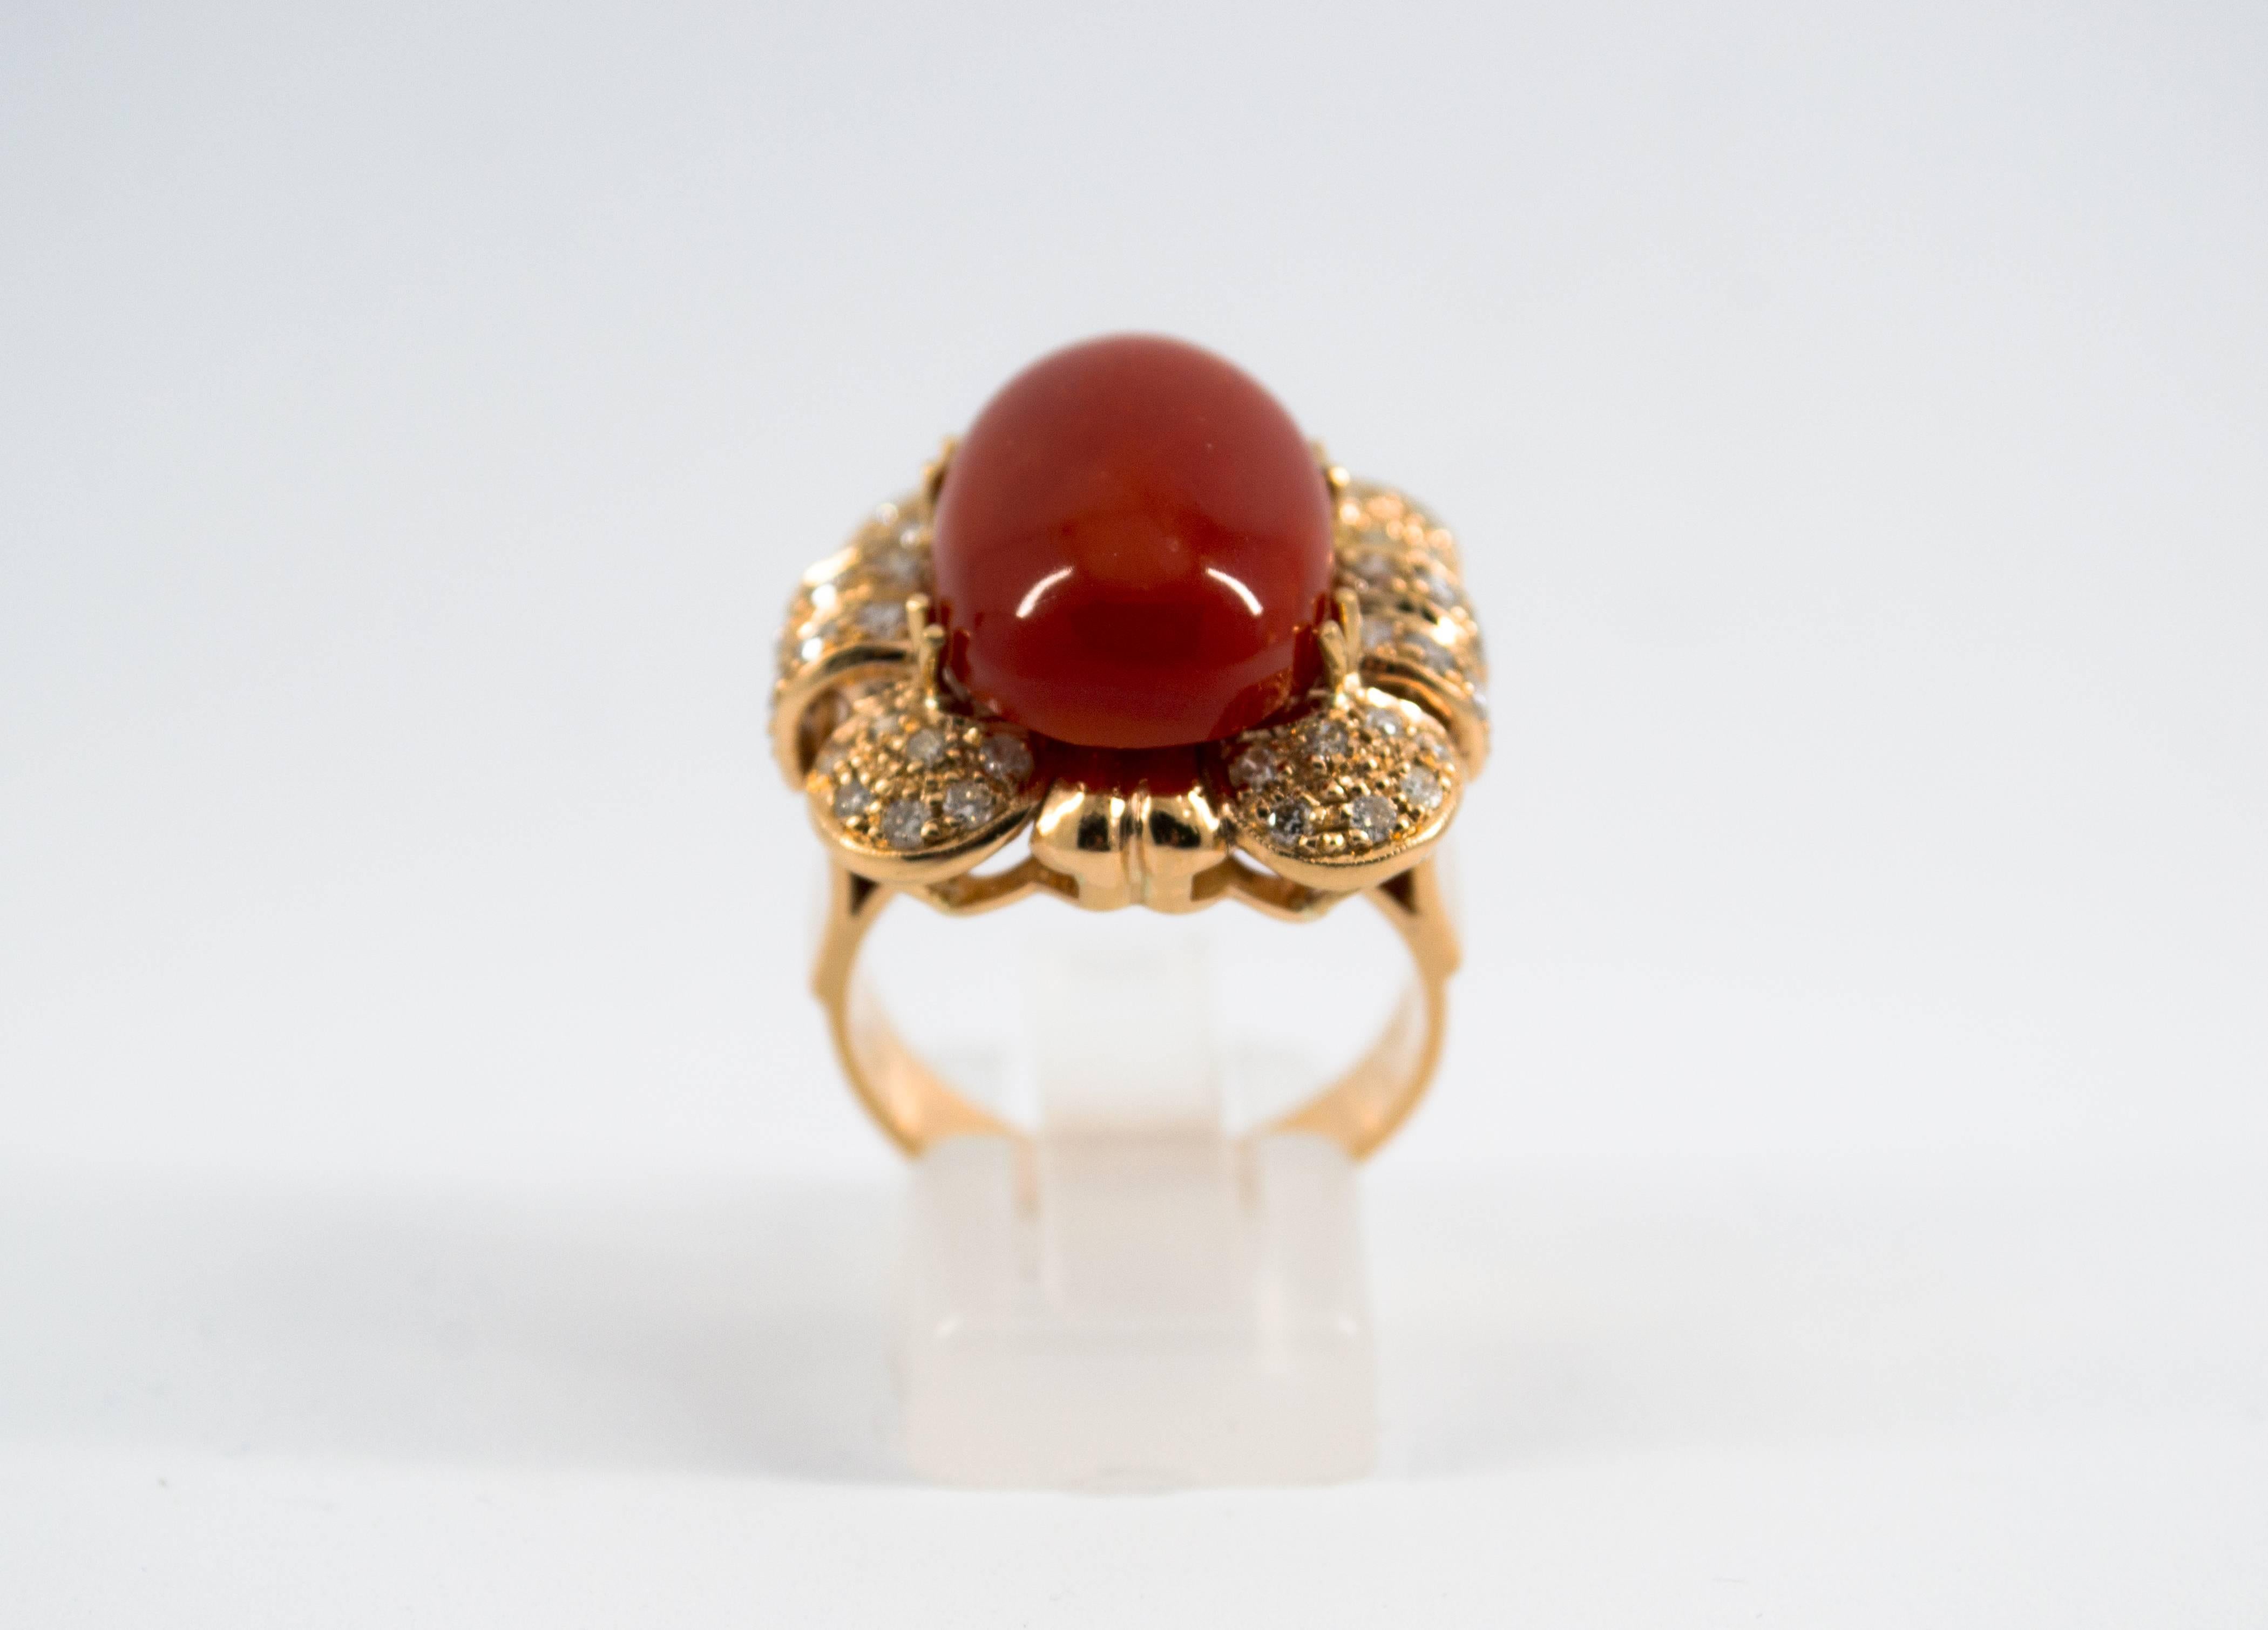 This Ring is made of 14K Yellow Gold.
This Ring has 0.70 Carats of White Diamonds.
This Ring has Mediterranean (Sardinia, Italy) Red Coral.
Size ITA: 15 USA: 7
We're a workshop so every piece is handmade, customizable and resizable.